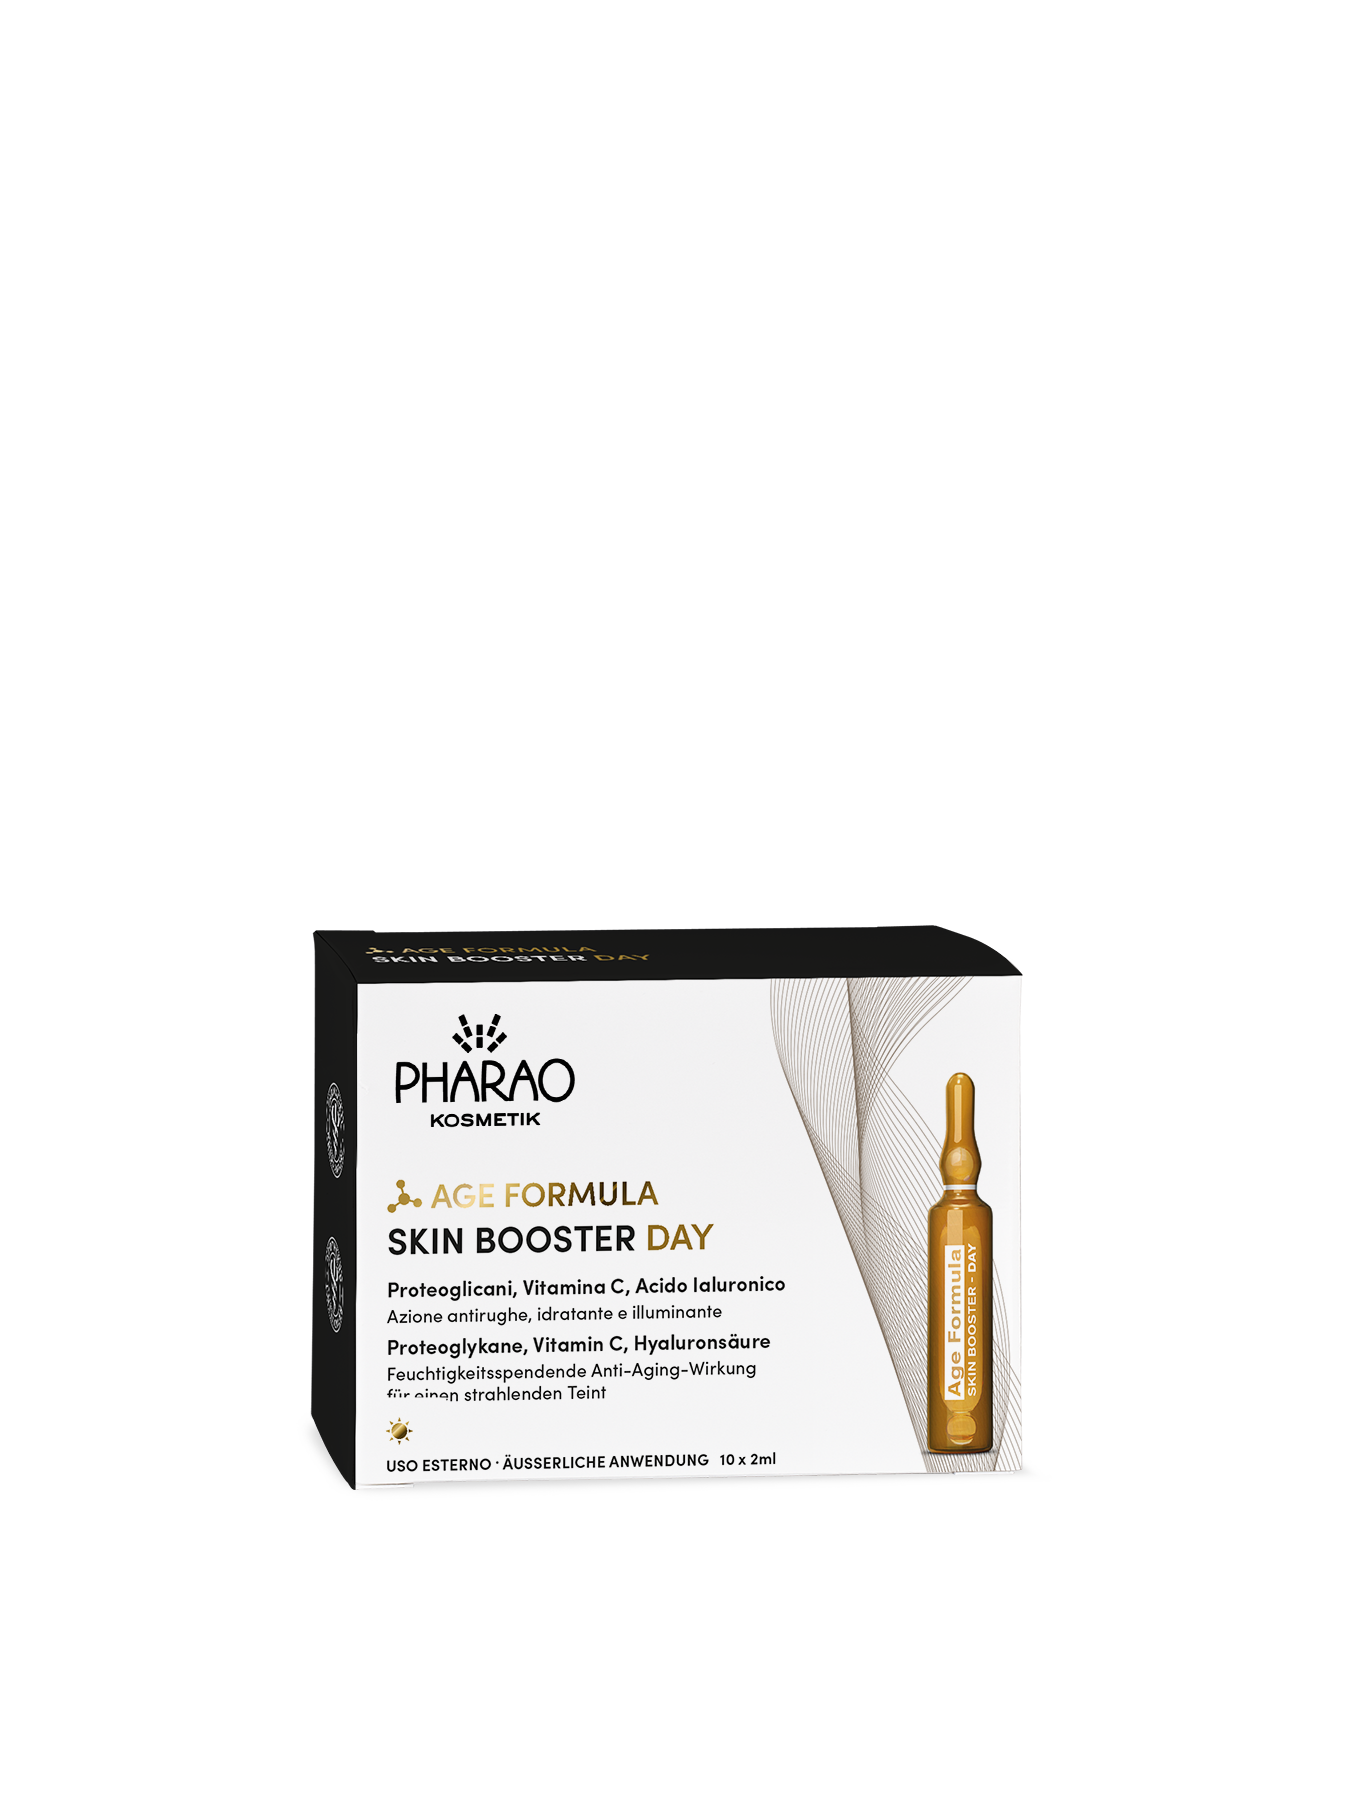 PA Age Formualr Skin booster Day